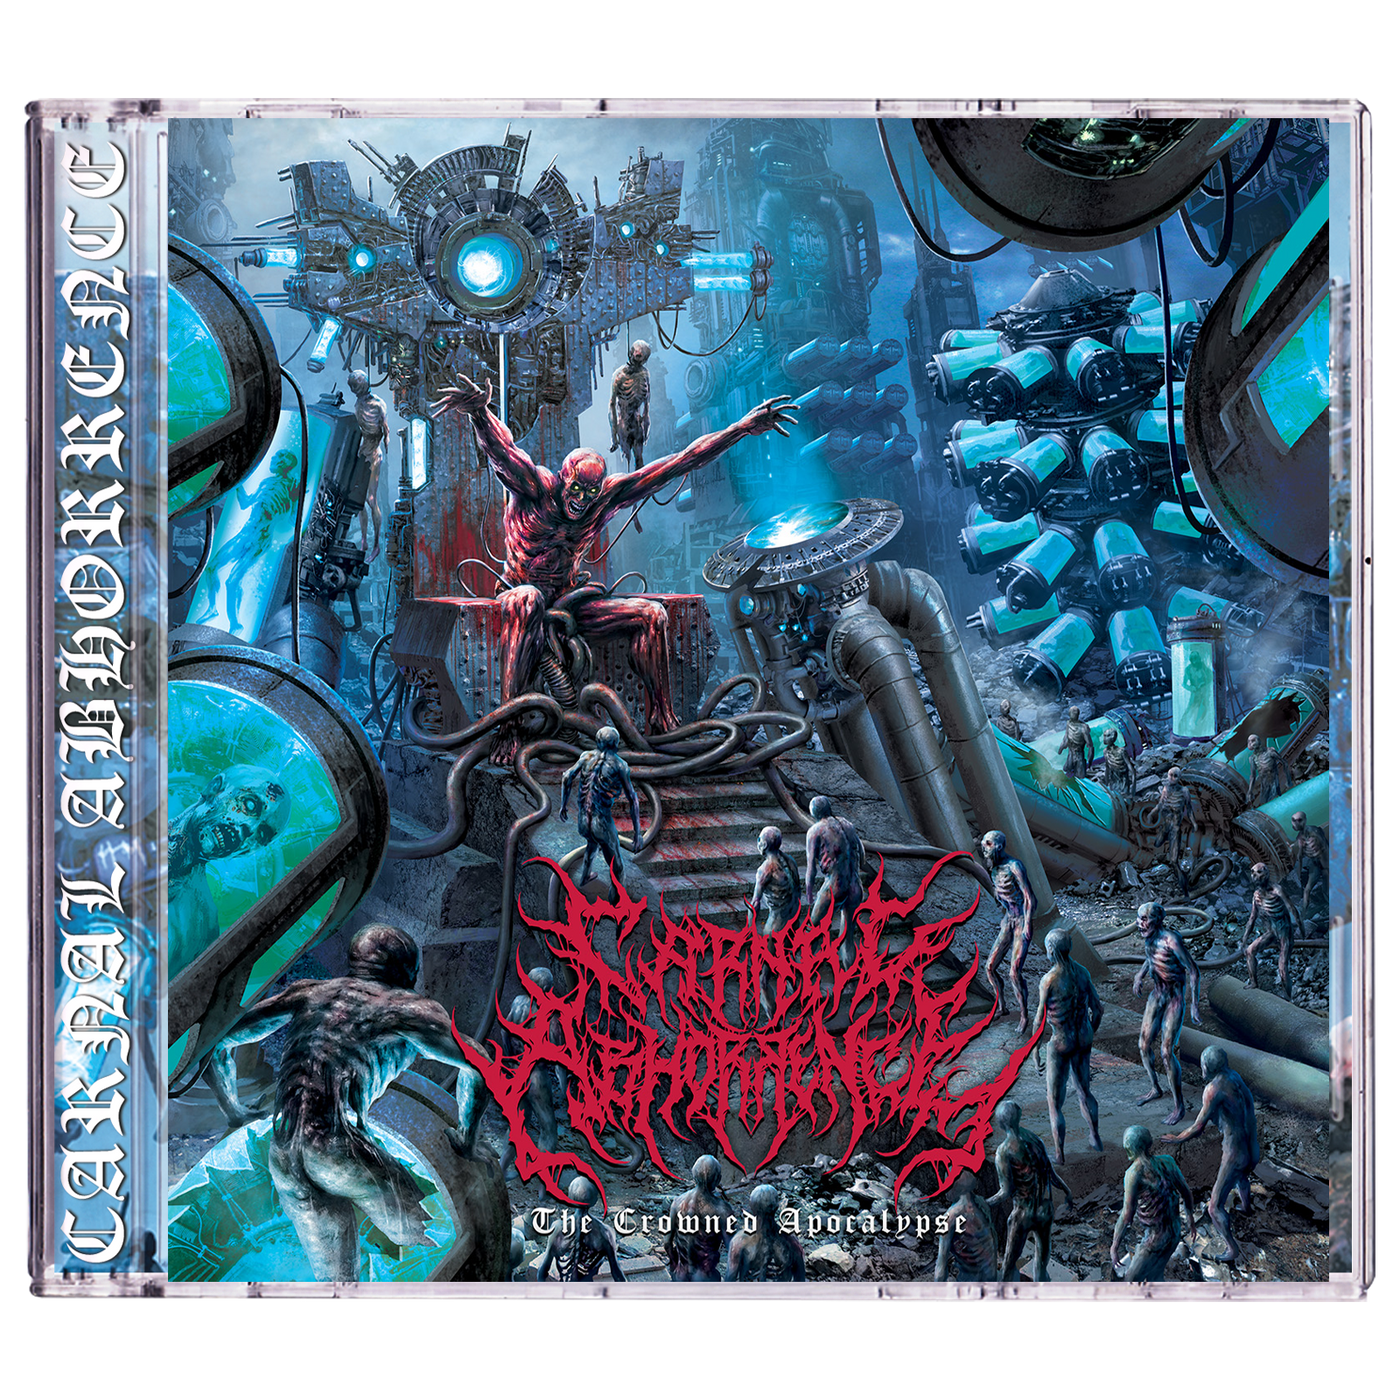 Carnal Abhorrence ’The Crowned Apocalypse’ CD